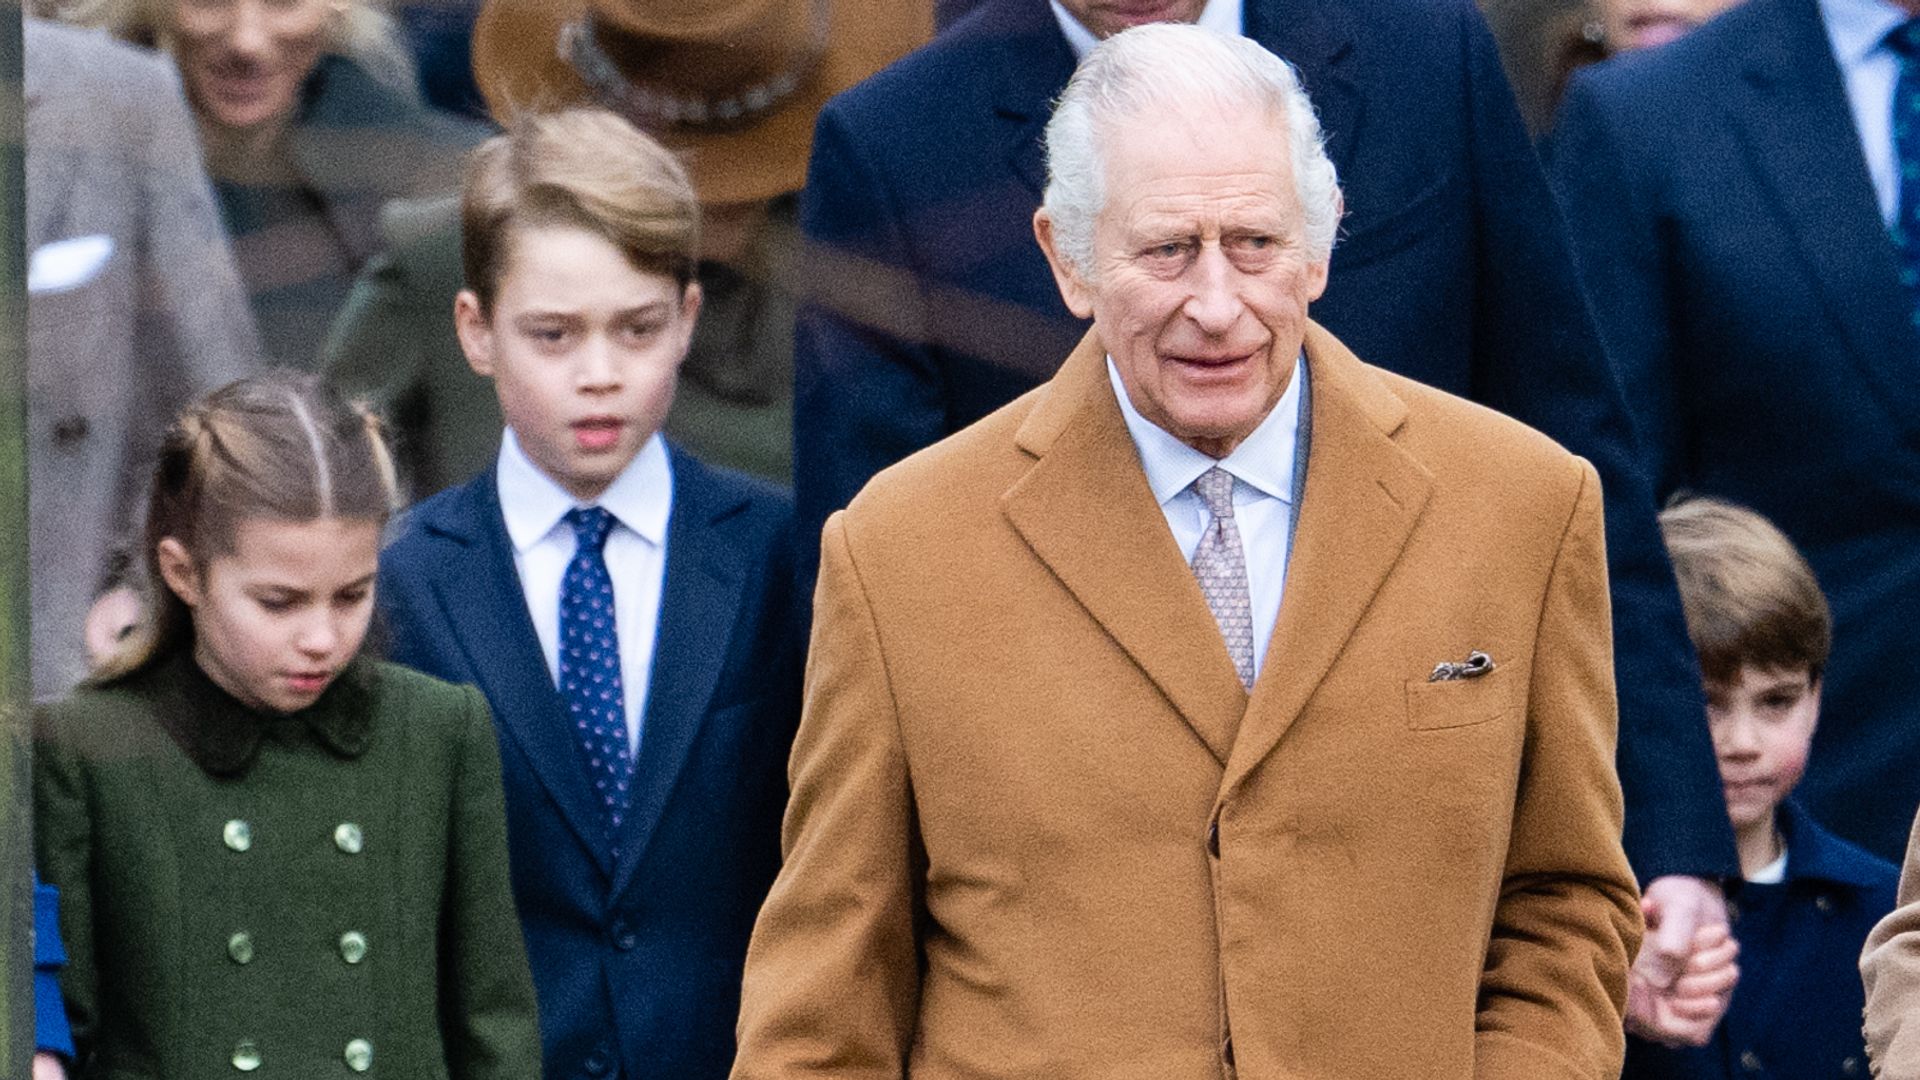 King Charles' special nod to George, Charlotte and Louis on first royal outing didn't go unnoticed